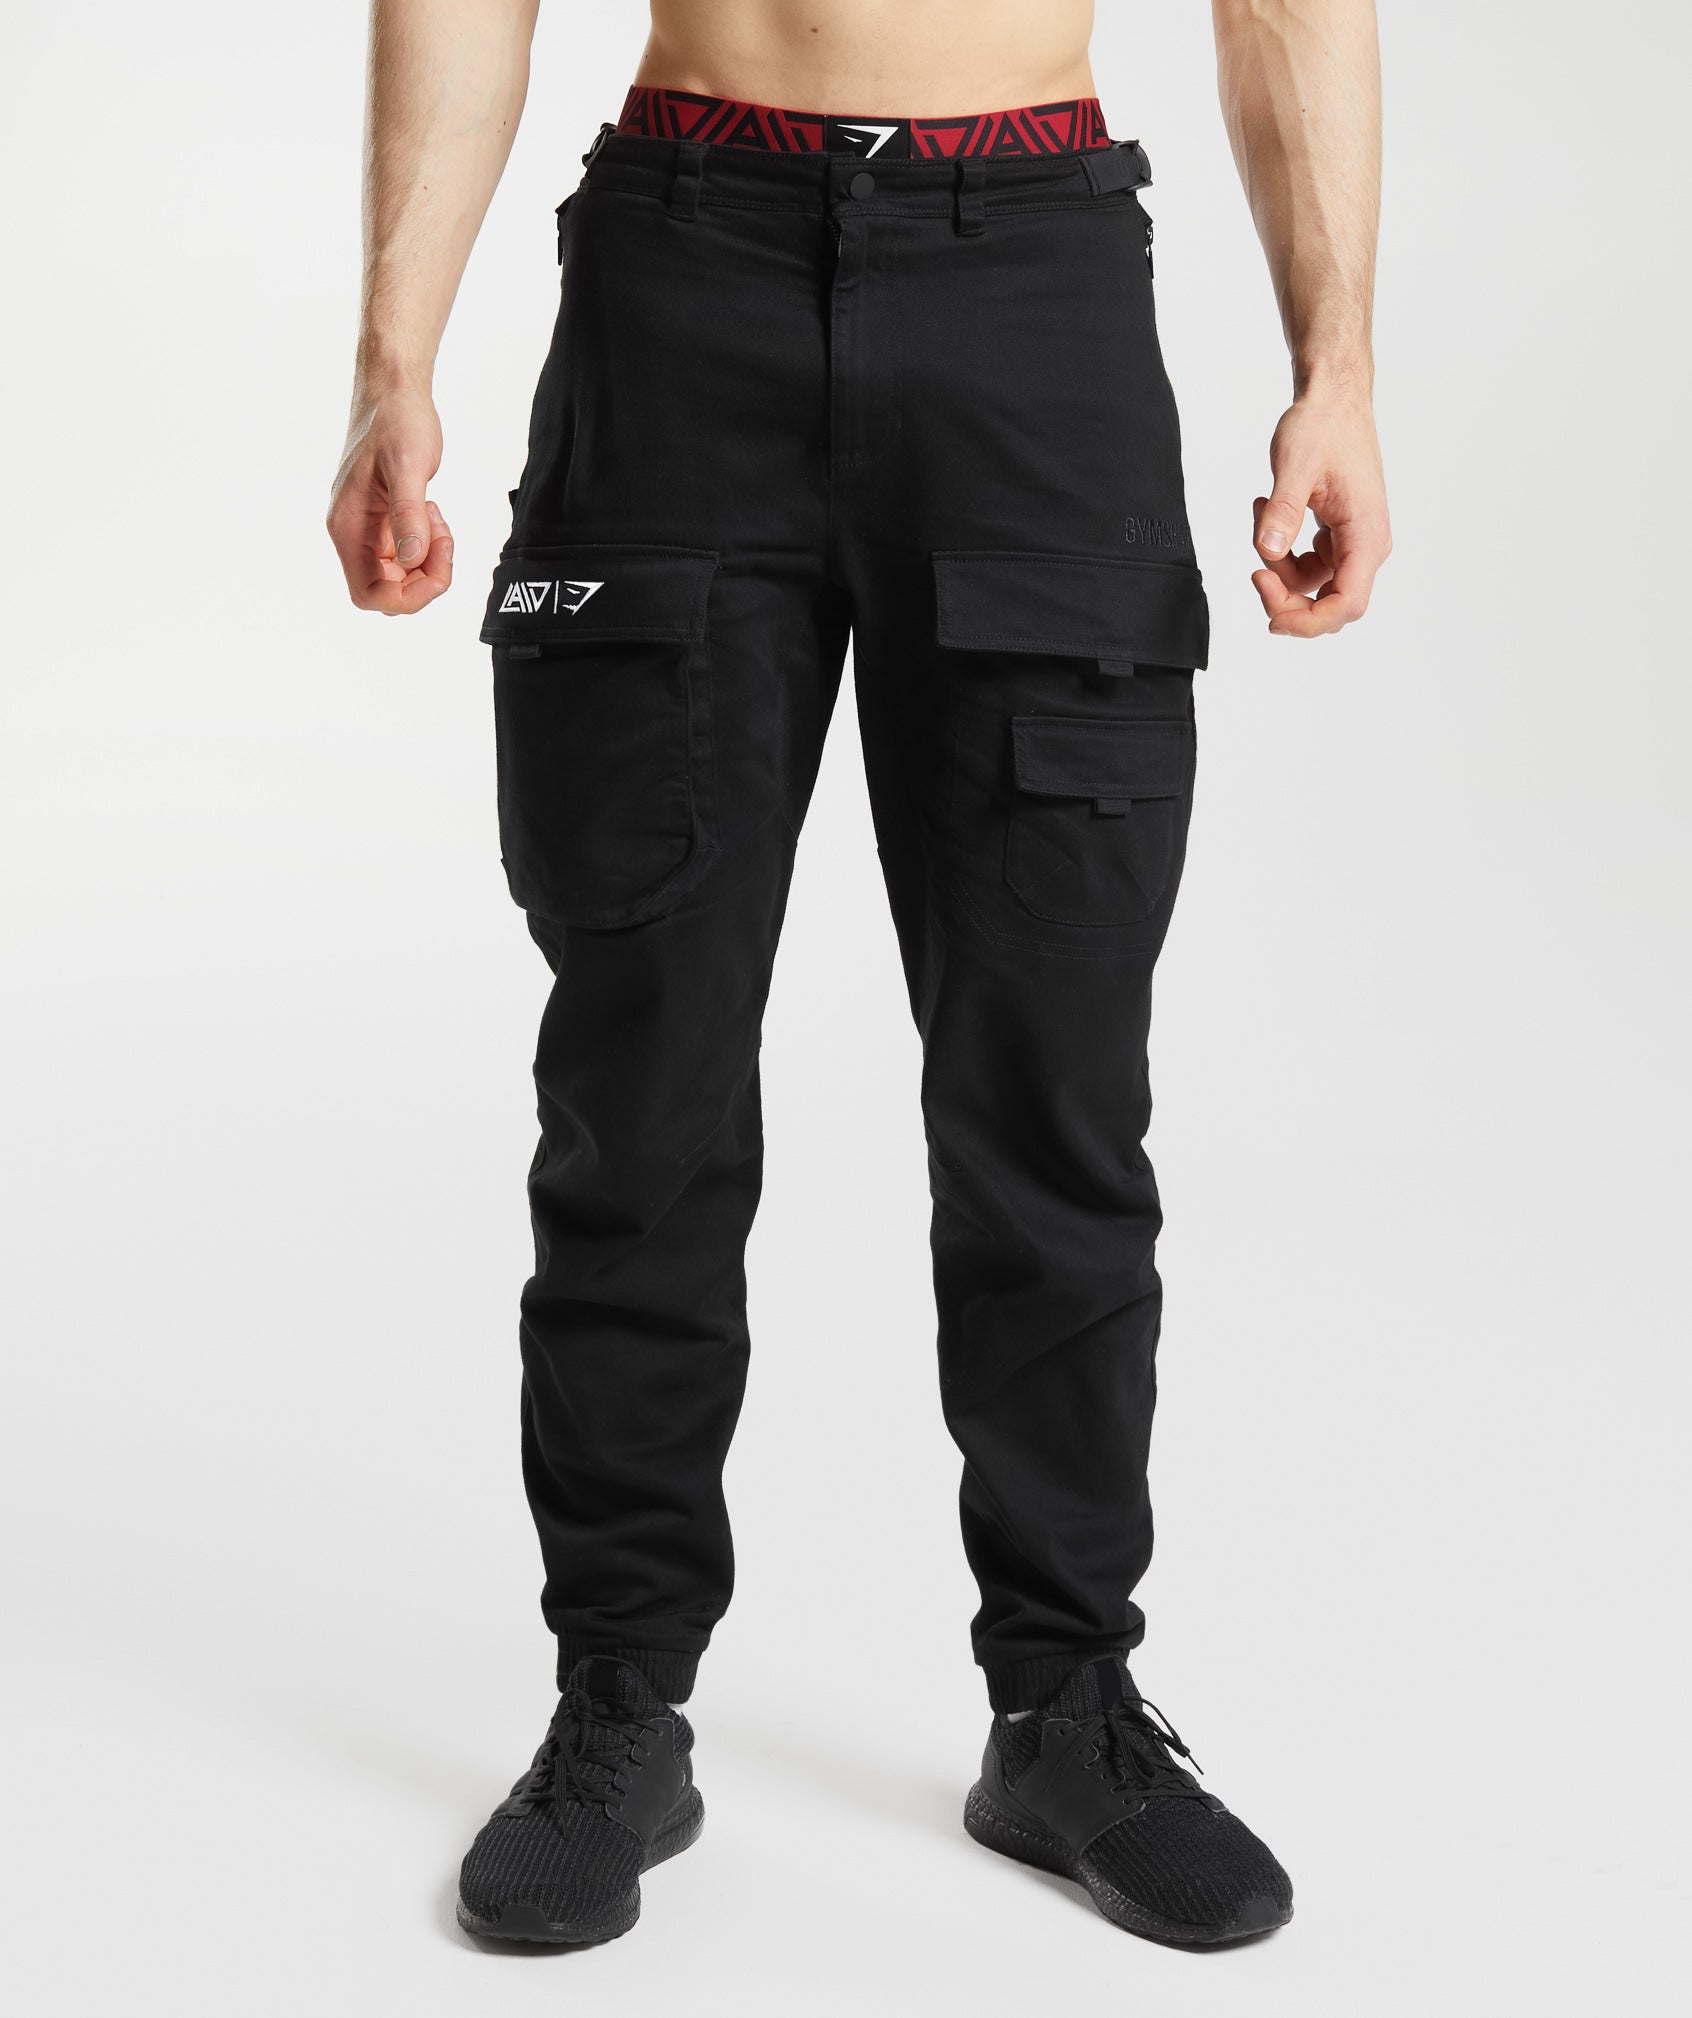 GS x David Laid Cargo Pants in Black - view 1